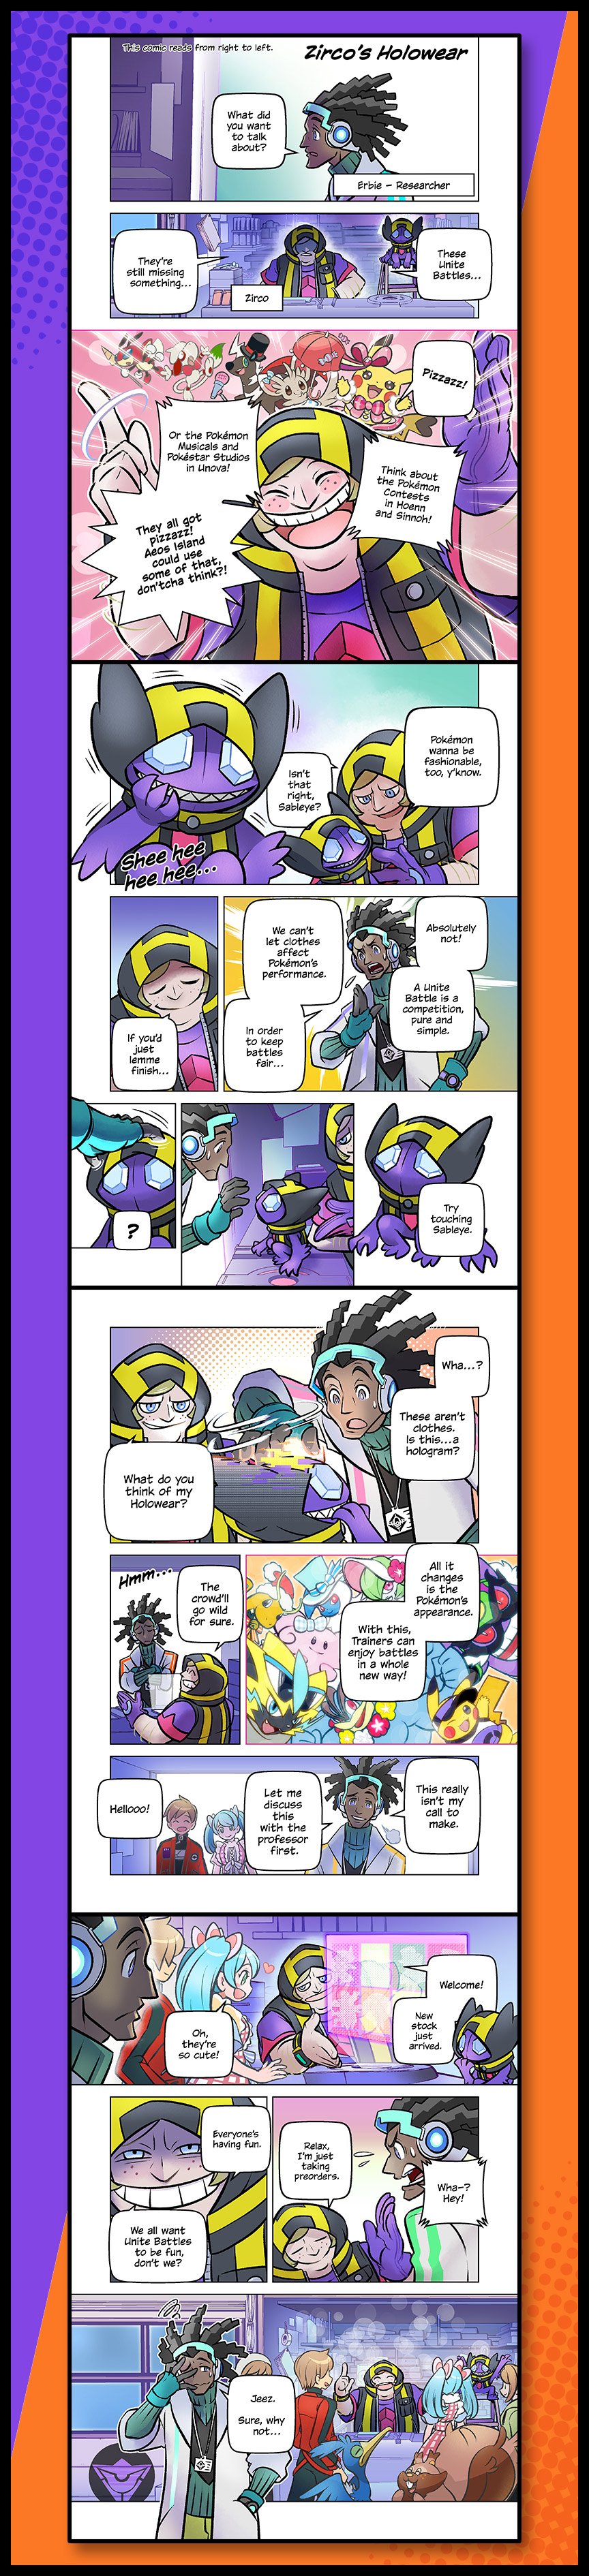 Chapter 1: Zirco’s Holowear. 1. Erbie (Researcher): What did you want to talk about? 2. Zirco: They’re still missing something. These Unite Battles… 3. Think about the Pokémon contests in Hoenn and Sinnoh! Or the Pokémon Musicals and Pokestar Studios in Unova! They all got pizzazz! Aoes Island could use some of that, don’tcha think?! 4. Pokémon wanna be fashionable too, y’know. Isn’t that right, Sableye? Sableye: Shee hee hee… 5. Zirco: If you’d just lemme finish… Erbie: Absolutely not! A United Battle is a competition, pure and simple. We can’t let clothes affect Pokémon’s performance. In order to keep battles fair… 6. Zirco’s hand goes through Sableye. Zirco: Try touching Sableye. 7. Erbie: Wha…? These aren’t clothes. Is this…a hologram? Zirco: What do you think of my Holowear? 8. The crowd’ll go wild for sure. All it changes is the Pokémon’s appearance. With this, Trainers can enjoy battles in a whole new way! 9. Erbie: This really isn’t my call to make. Let me discuss this with the professor first. Boy and girl enter room. Boy: Hellooo! 10. Zirco: Welcome! New stock just arrived. Girl: Oh, they’re so cute! 11. Erbie: Wha-? Hey! Zirco: Relax, I’m just taking preorders. Everyone’s having fun. We all want Unite Battles to be fun, don’t we? 12. Erbie: Jeez. Sure, why not…